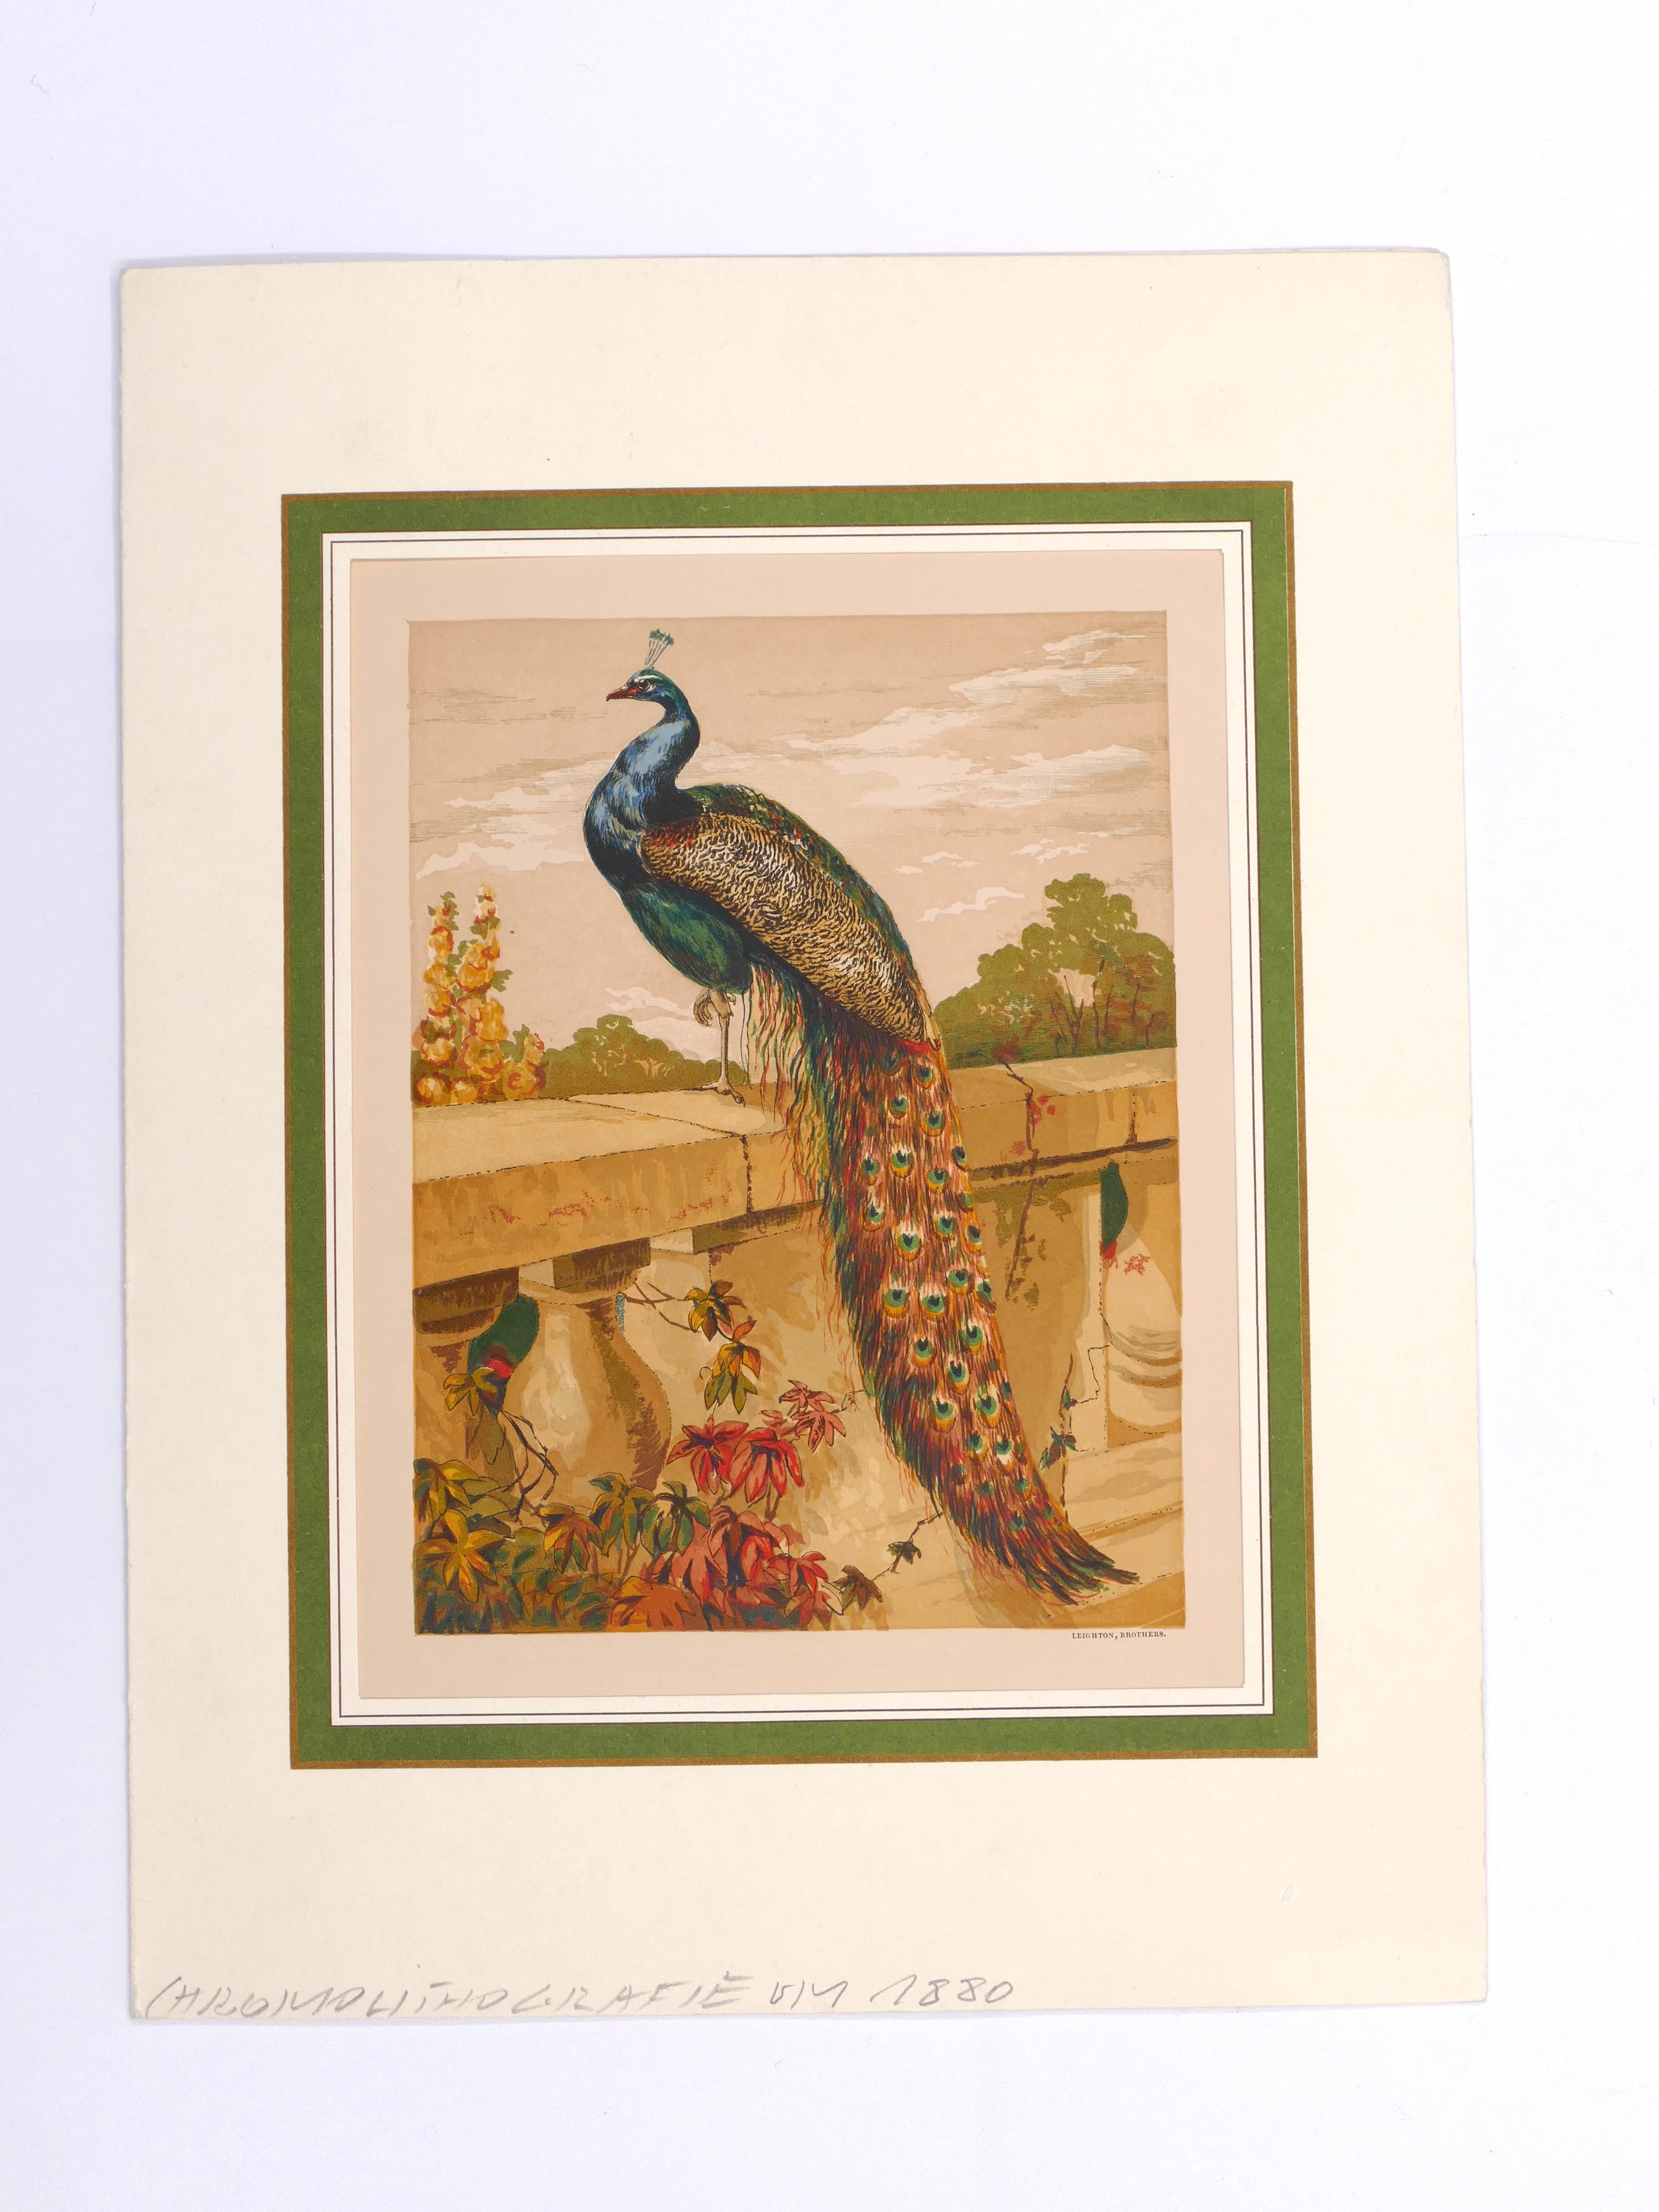 A Peacock - Original Chromelihtograph late 19th Century - Print by Unknown